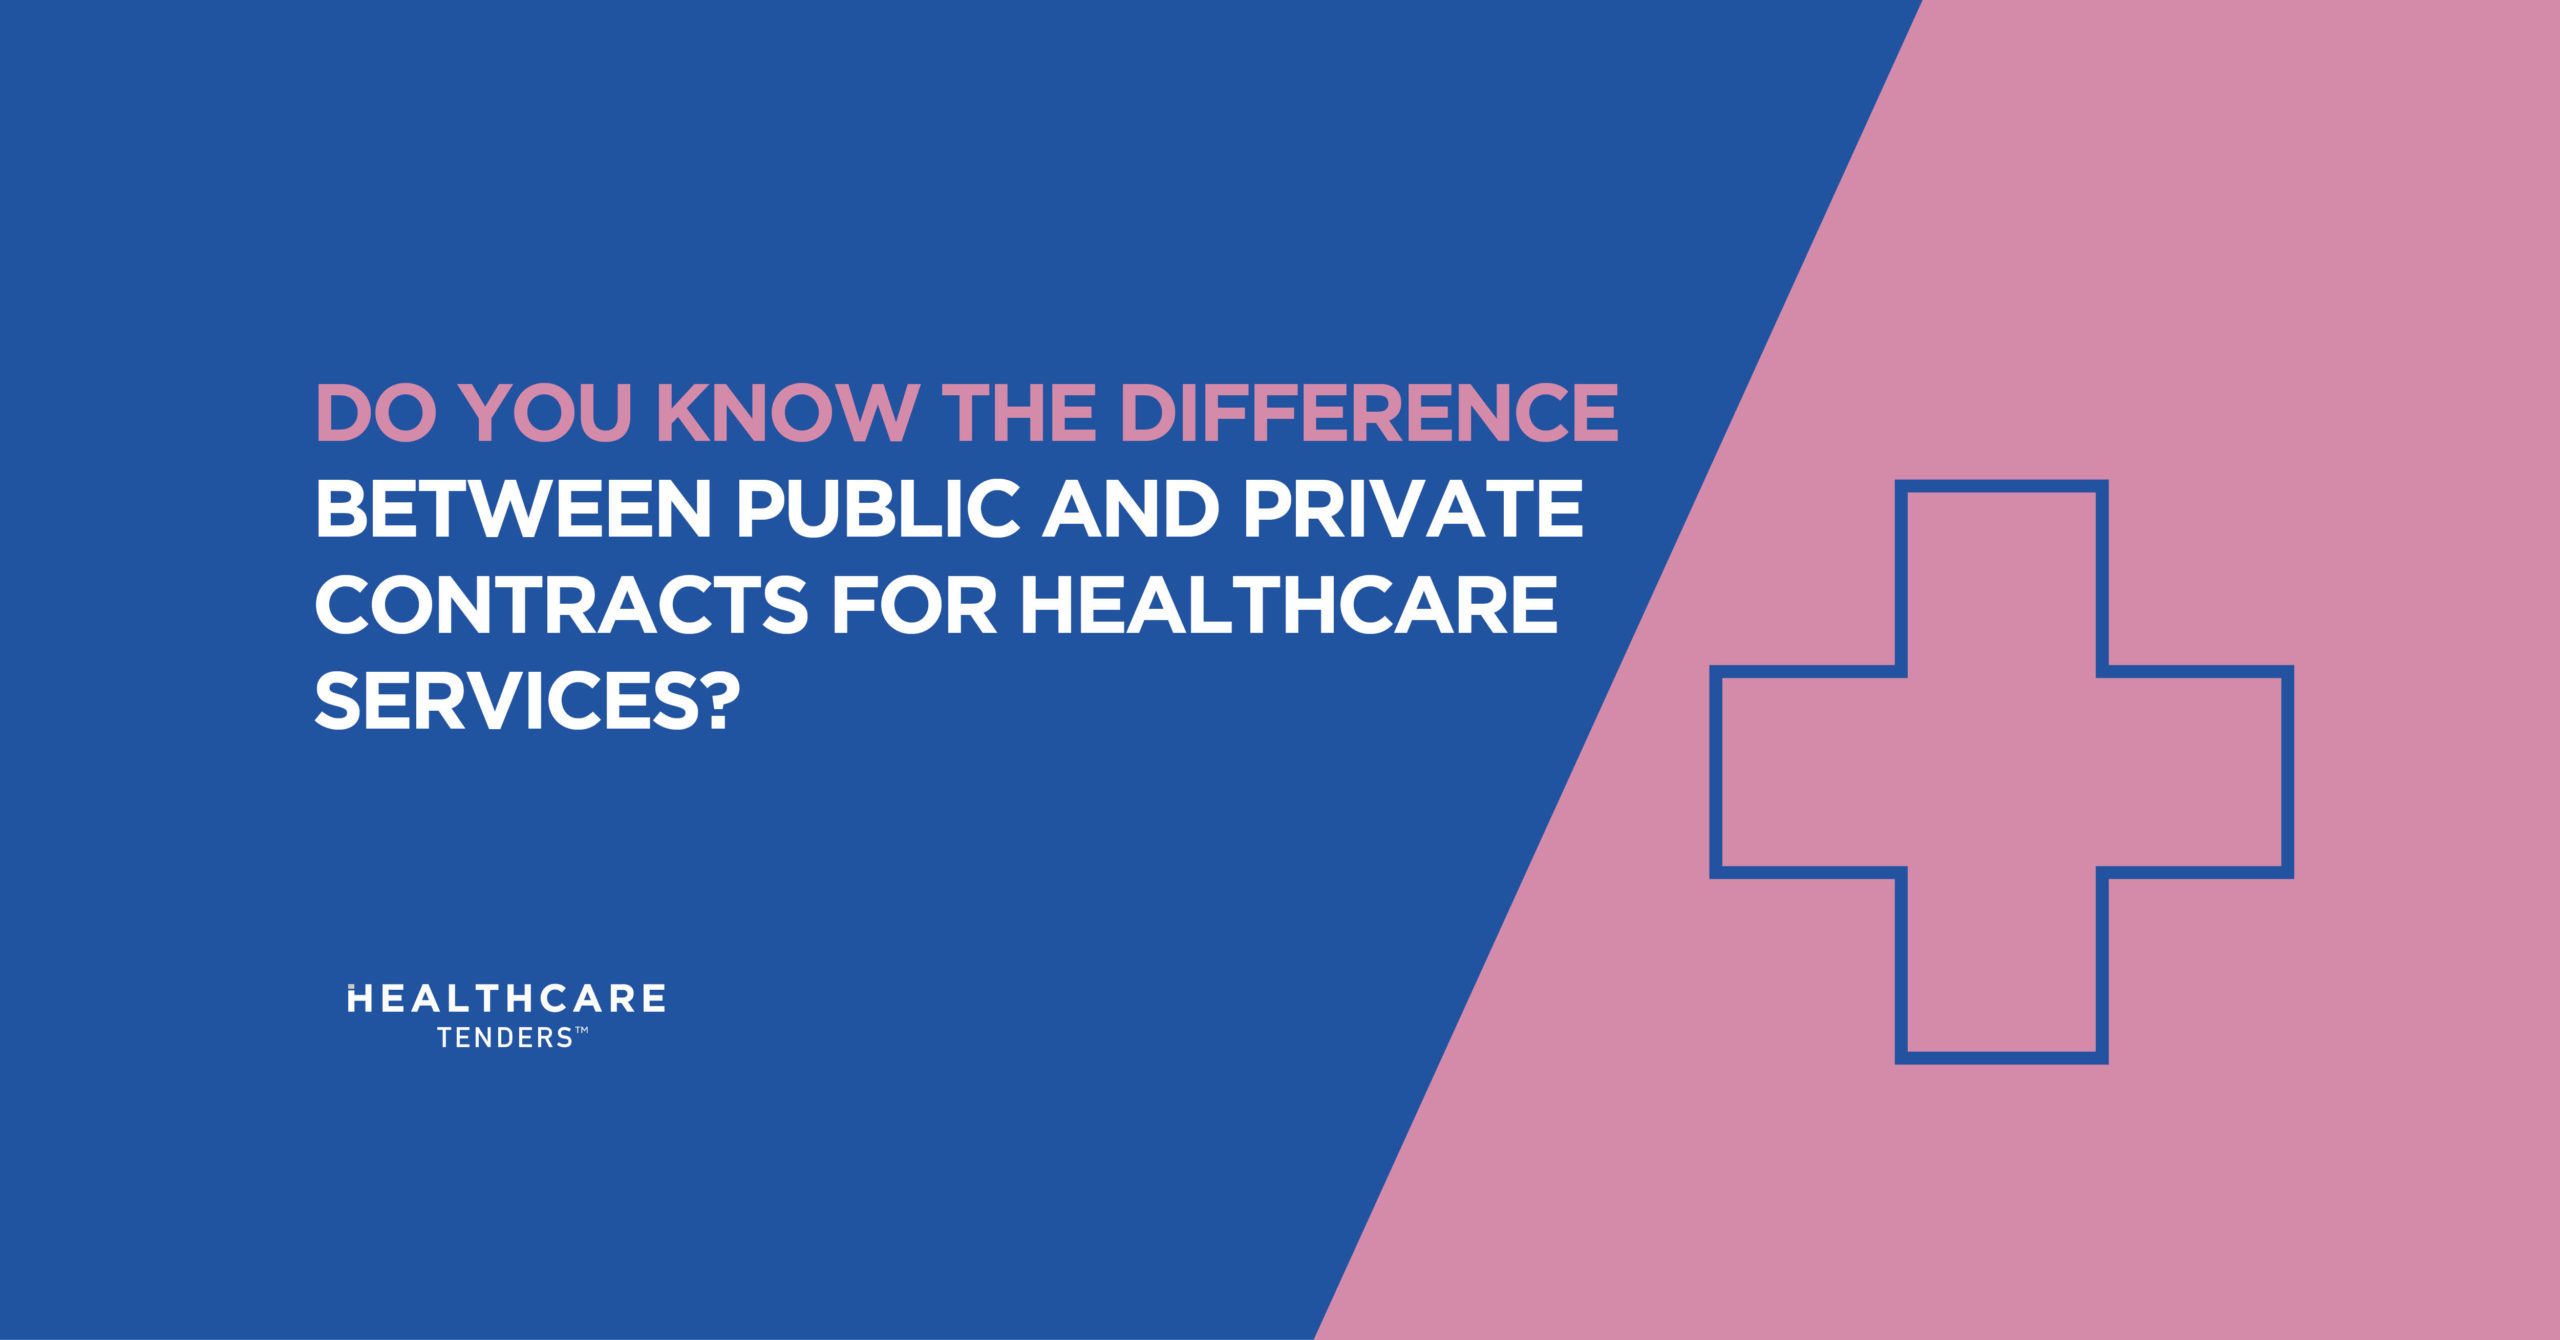 Do You Know the Difference Between Public and Private Contracts for Healthcare Services?